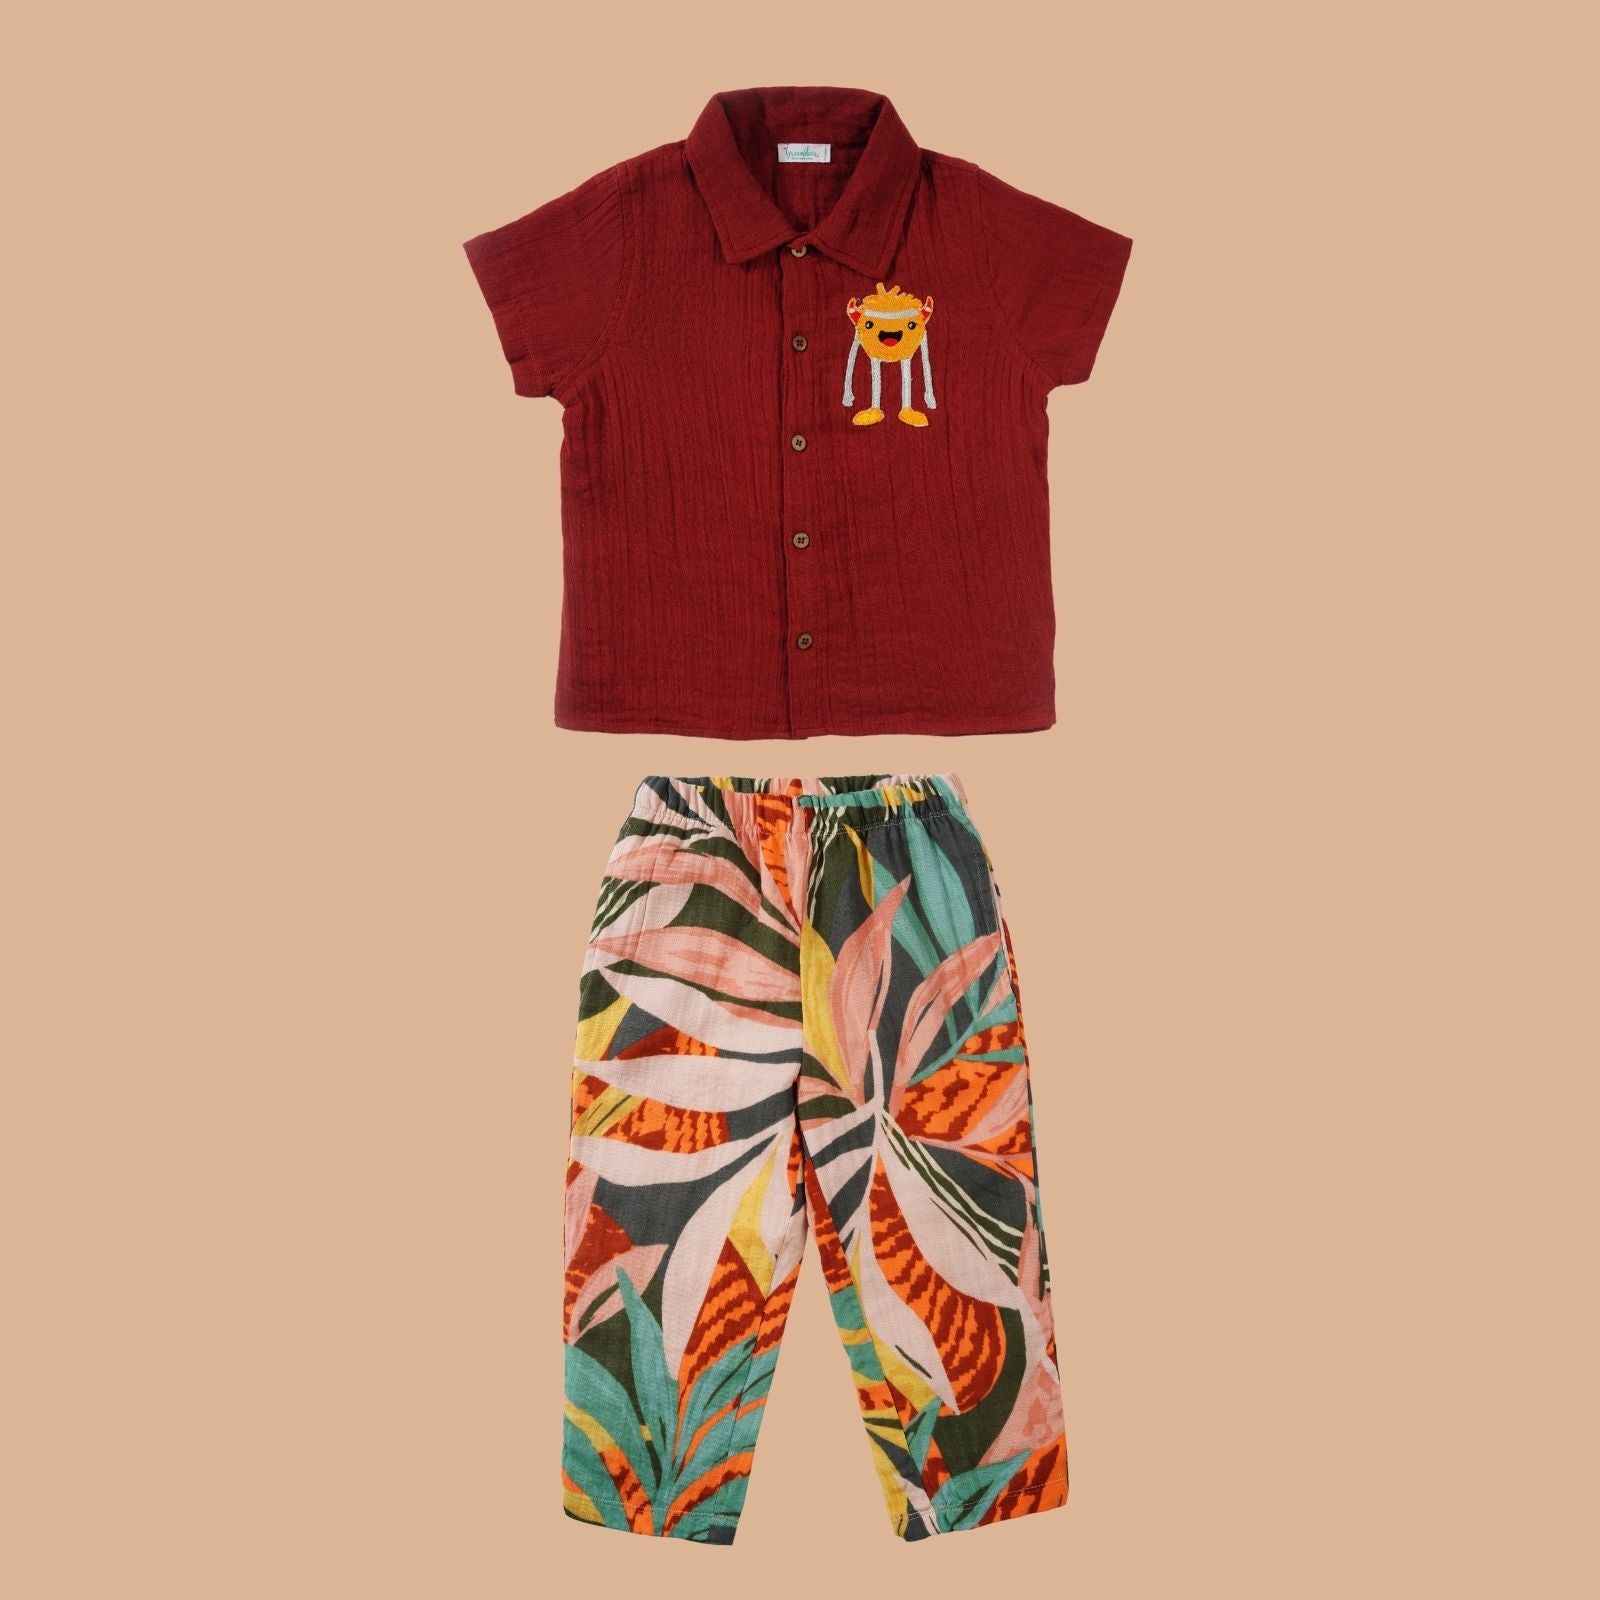 Greendeer Cherry Red Shirt with Jungle Print Pants in Cotton